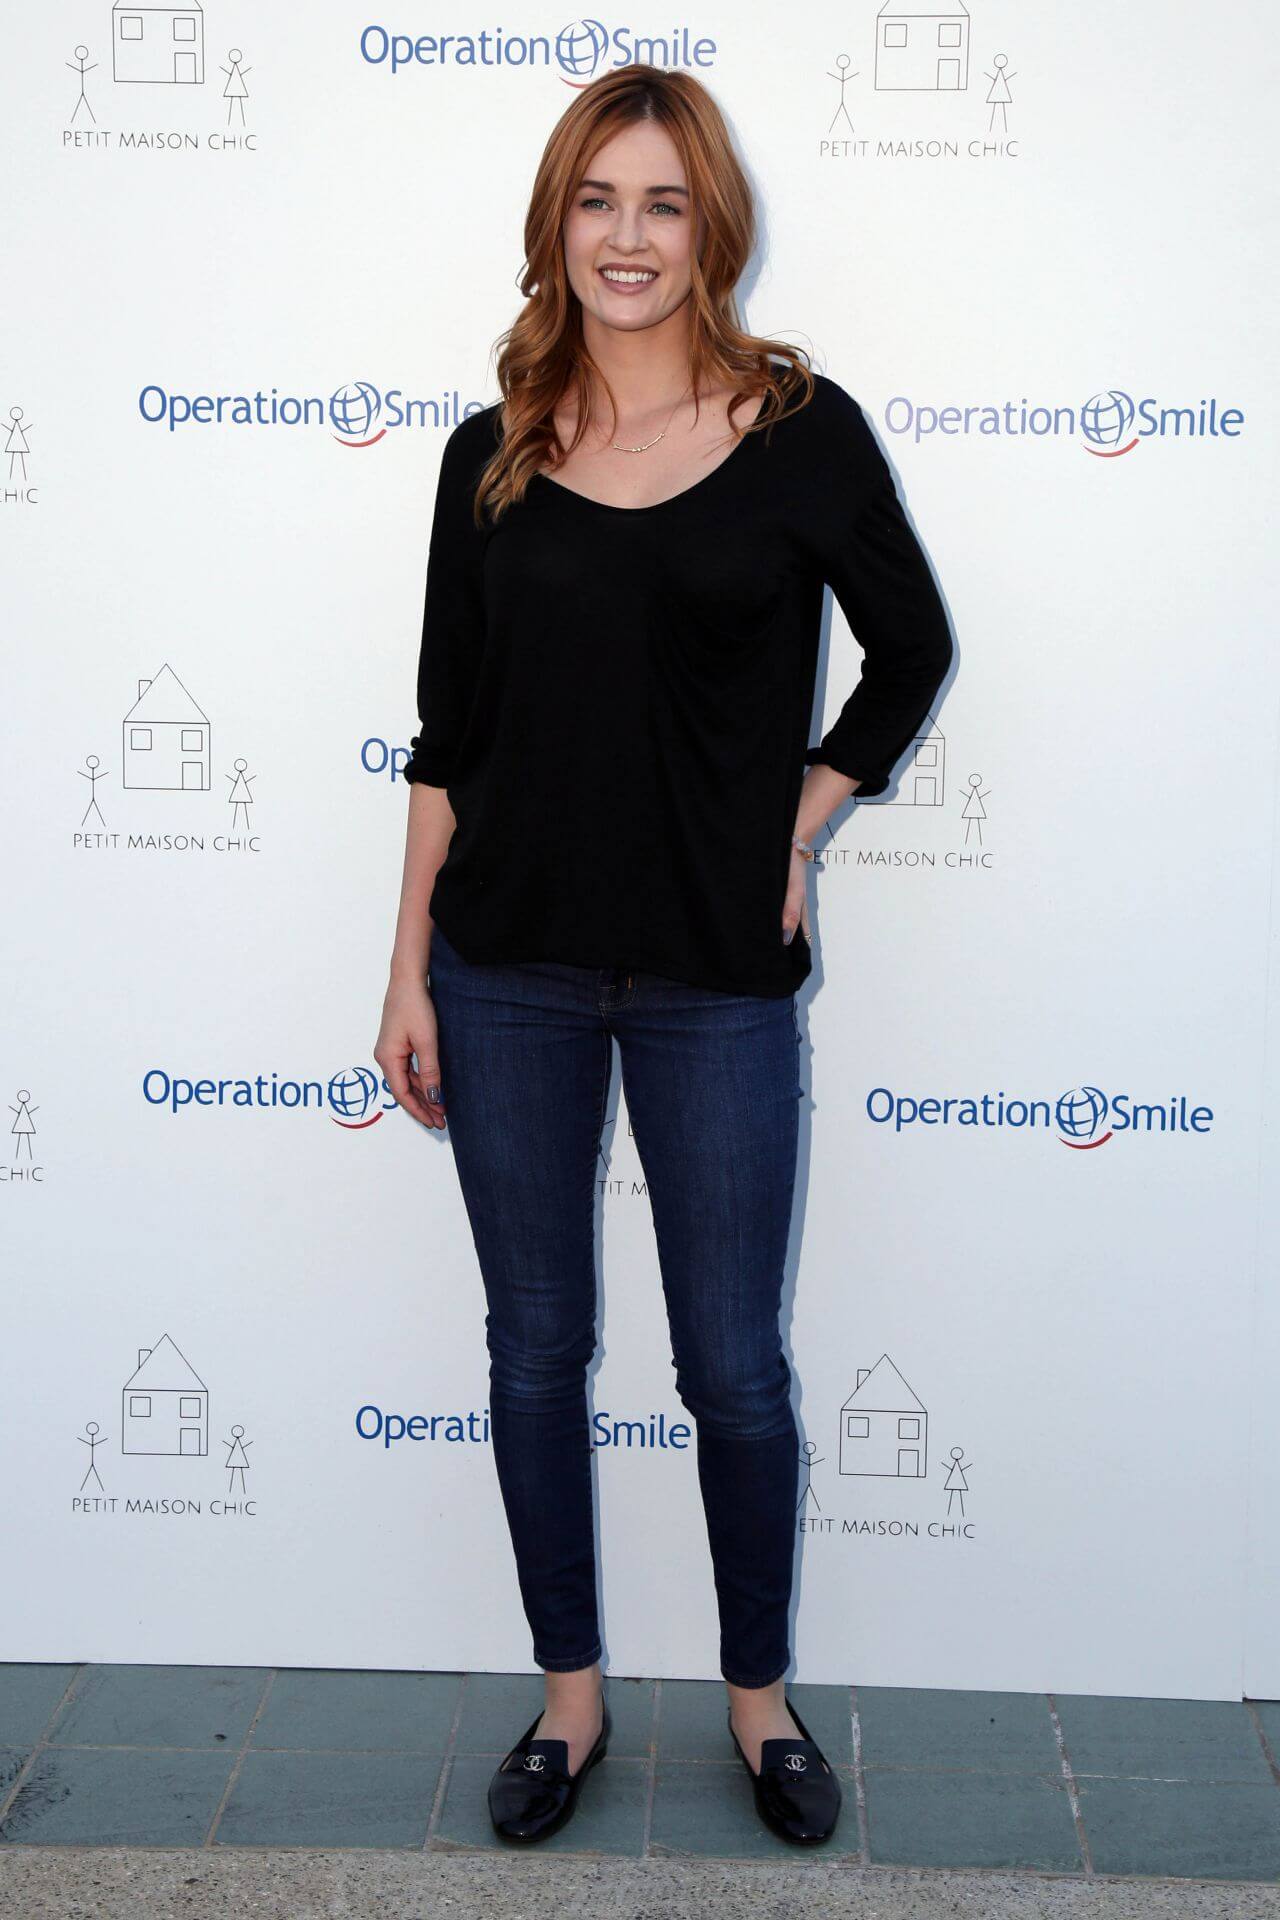 Ambyr Childers In Black Full Sleeve Top With Denim Jeans At Petit Maison Chic Fashion Show in Beverly Hills